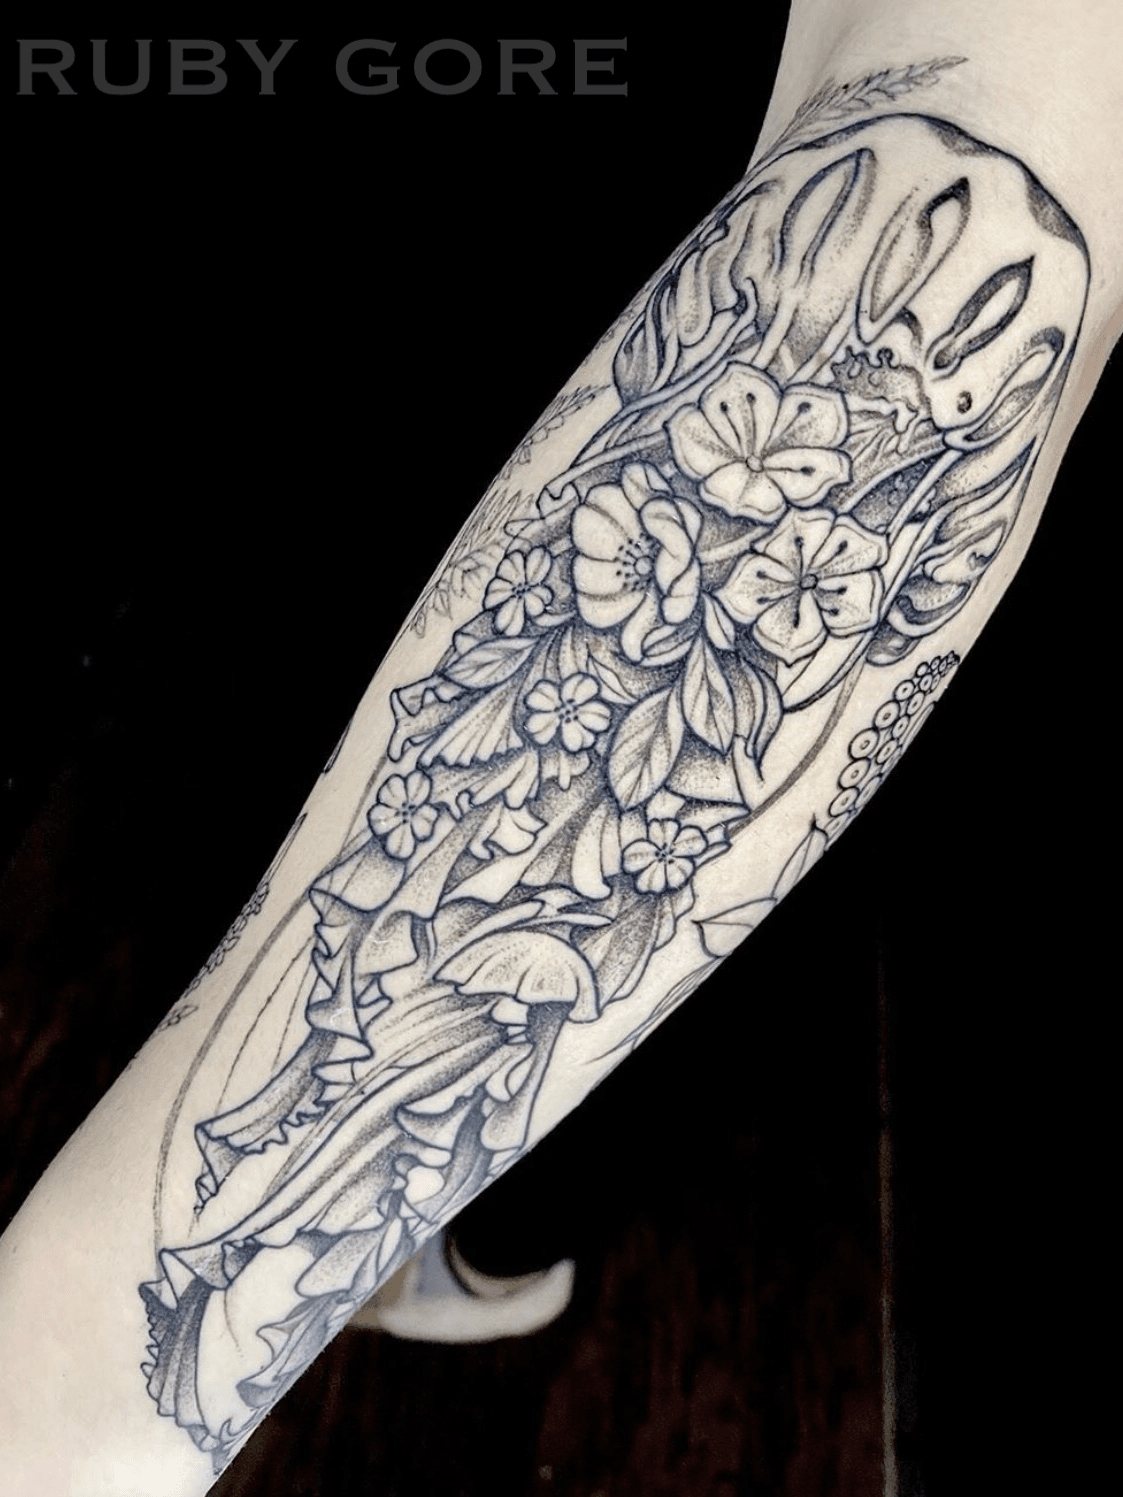 Tattoo uploaded by Ruby Gore • Healed color floral scar cover up  #scarcoverup #etching #cherryblossom #illustrative #linework #fineline # delicate #flower #floral #animal #nature #botanical #realistic #girlytattoo  #idea #design #drawing #sketch http